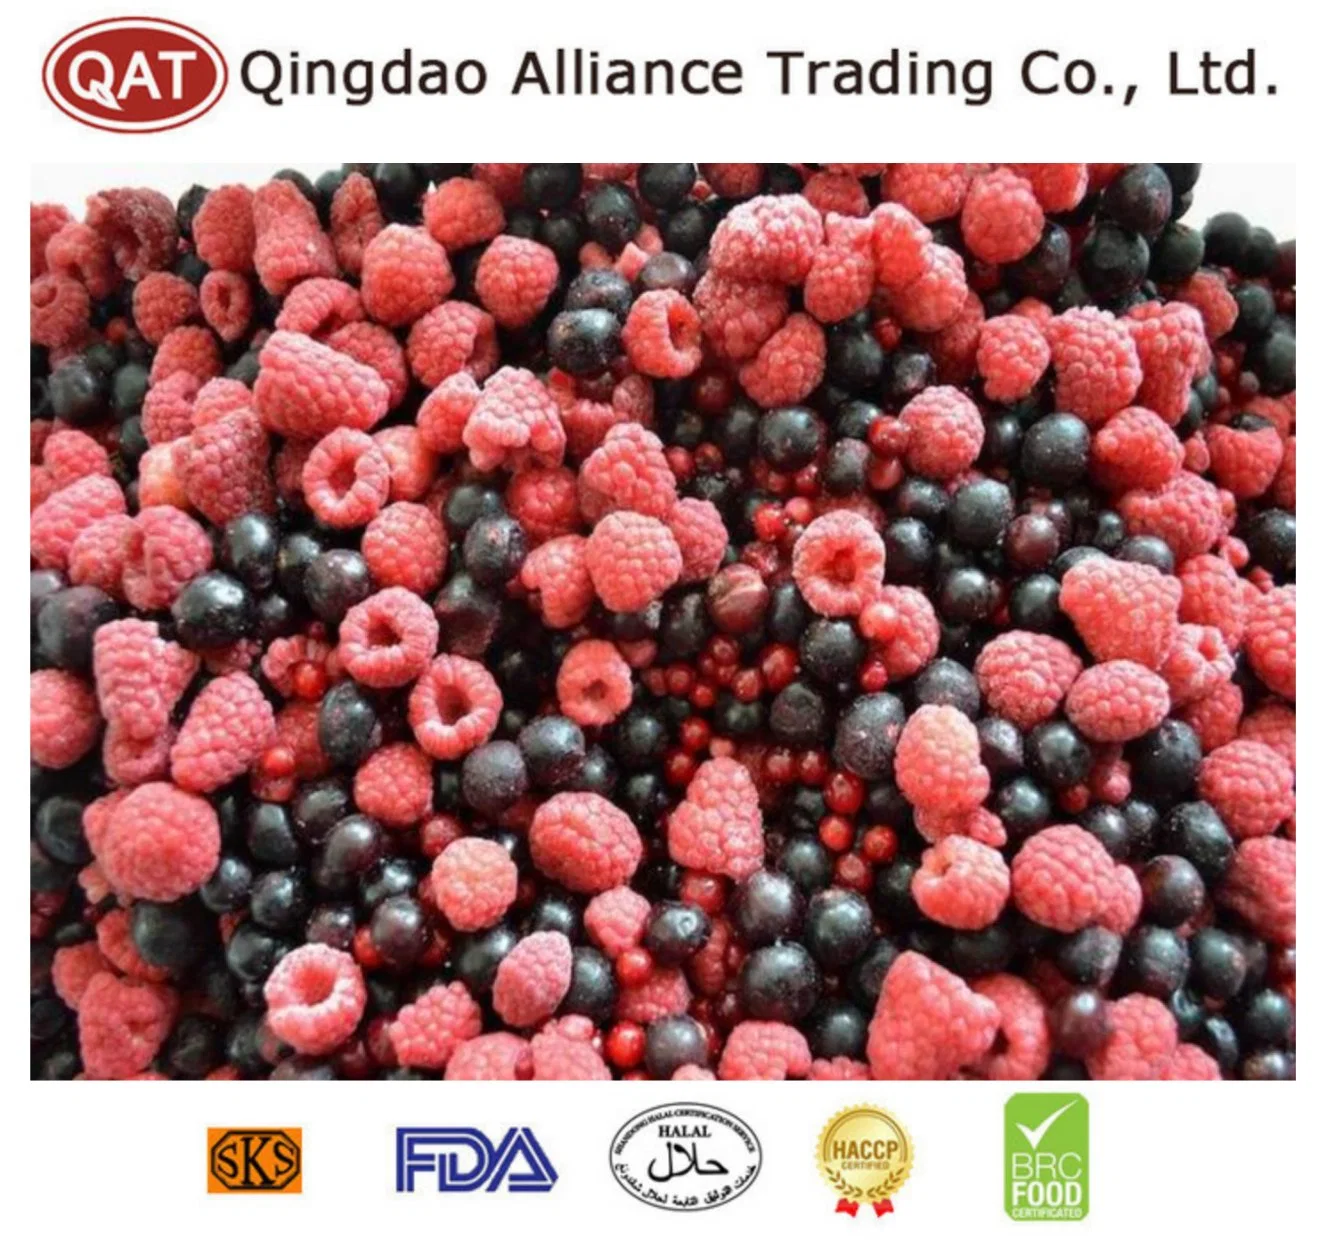 IQF Frozen Fruits Mixed Berry Strawberry Blueberry Blackberry Raspberry with Brc Certificate